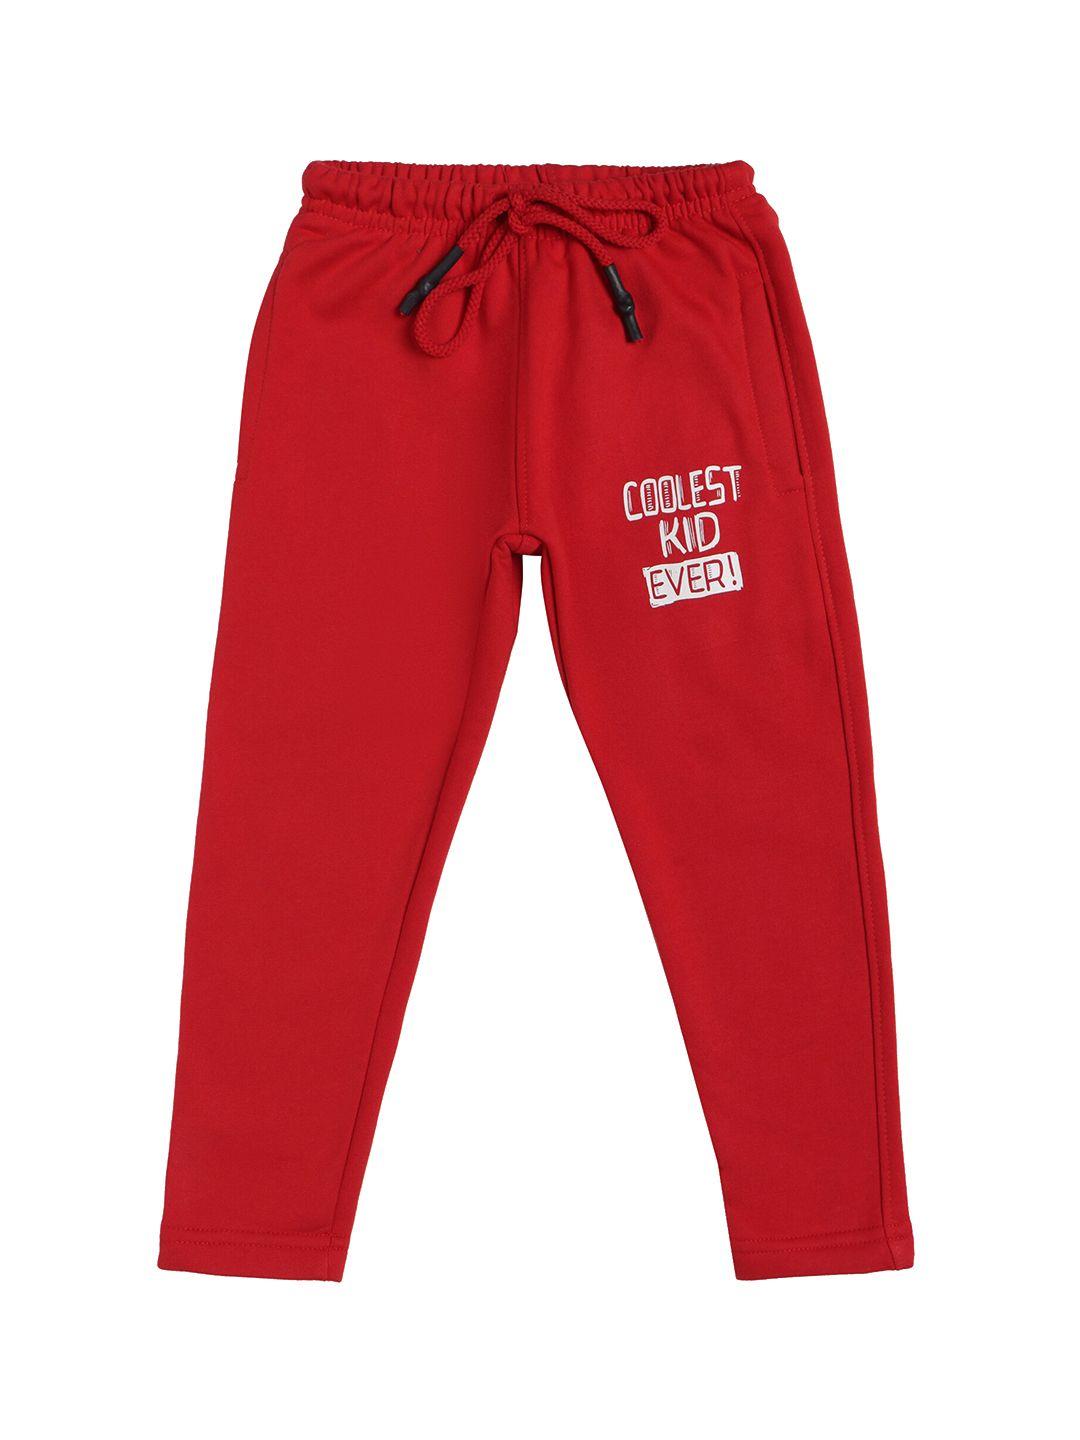 dyca-boys-red-solid-regular-fit-cotton-track-pants